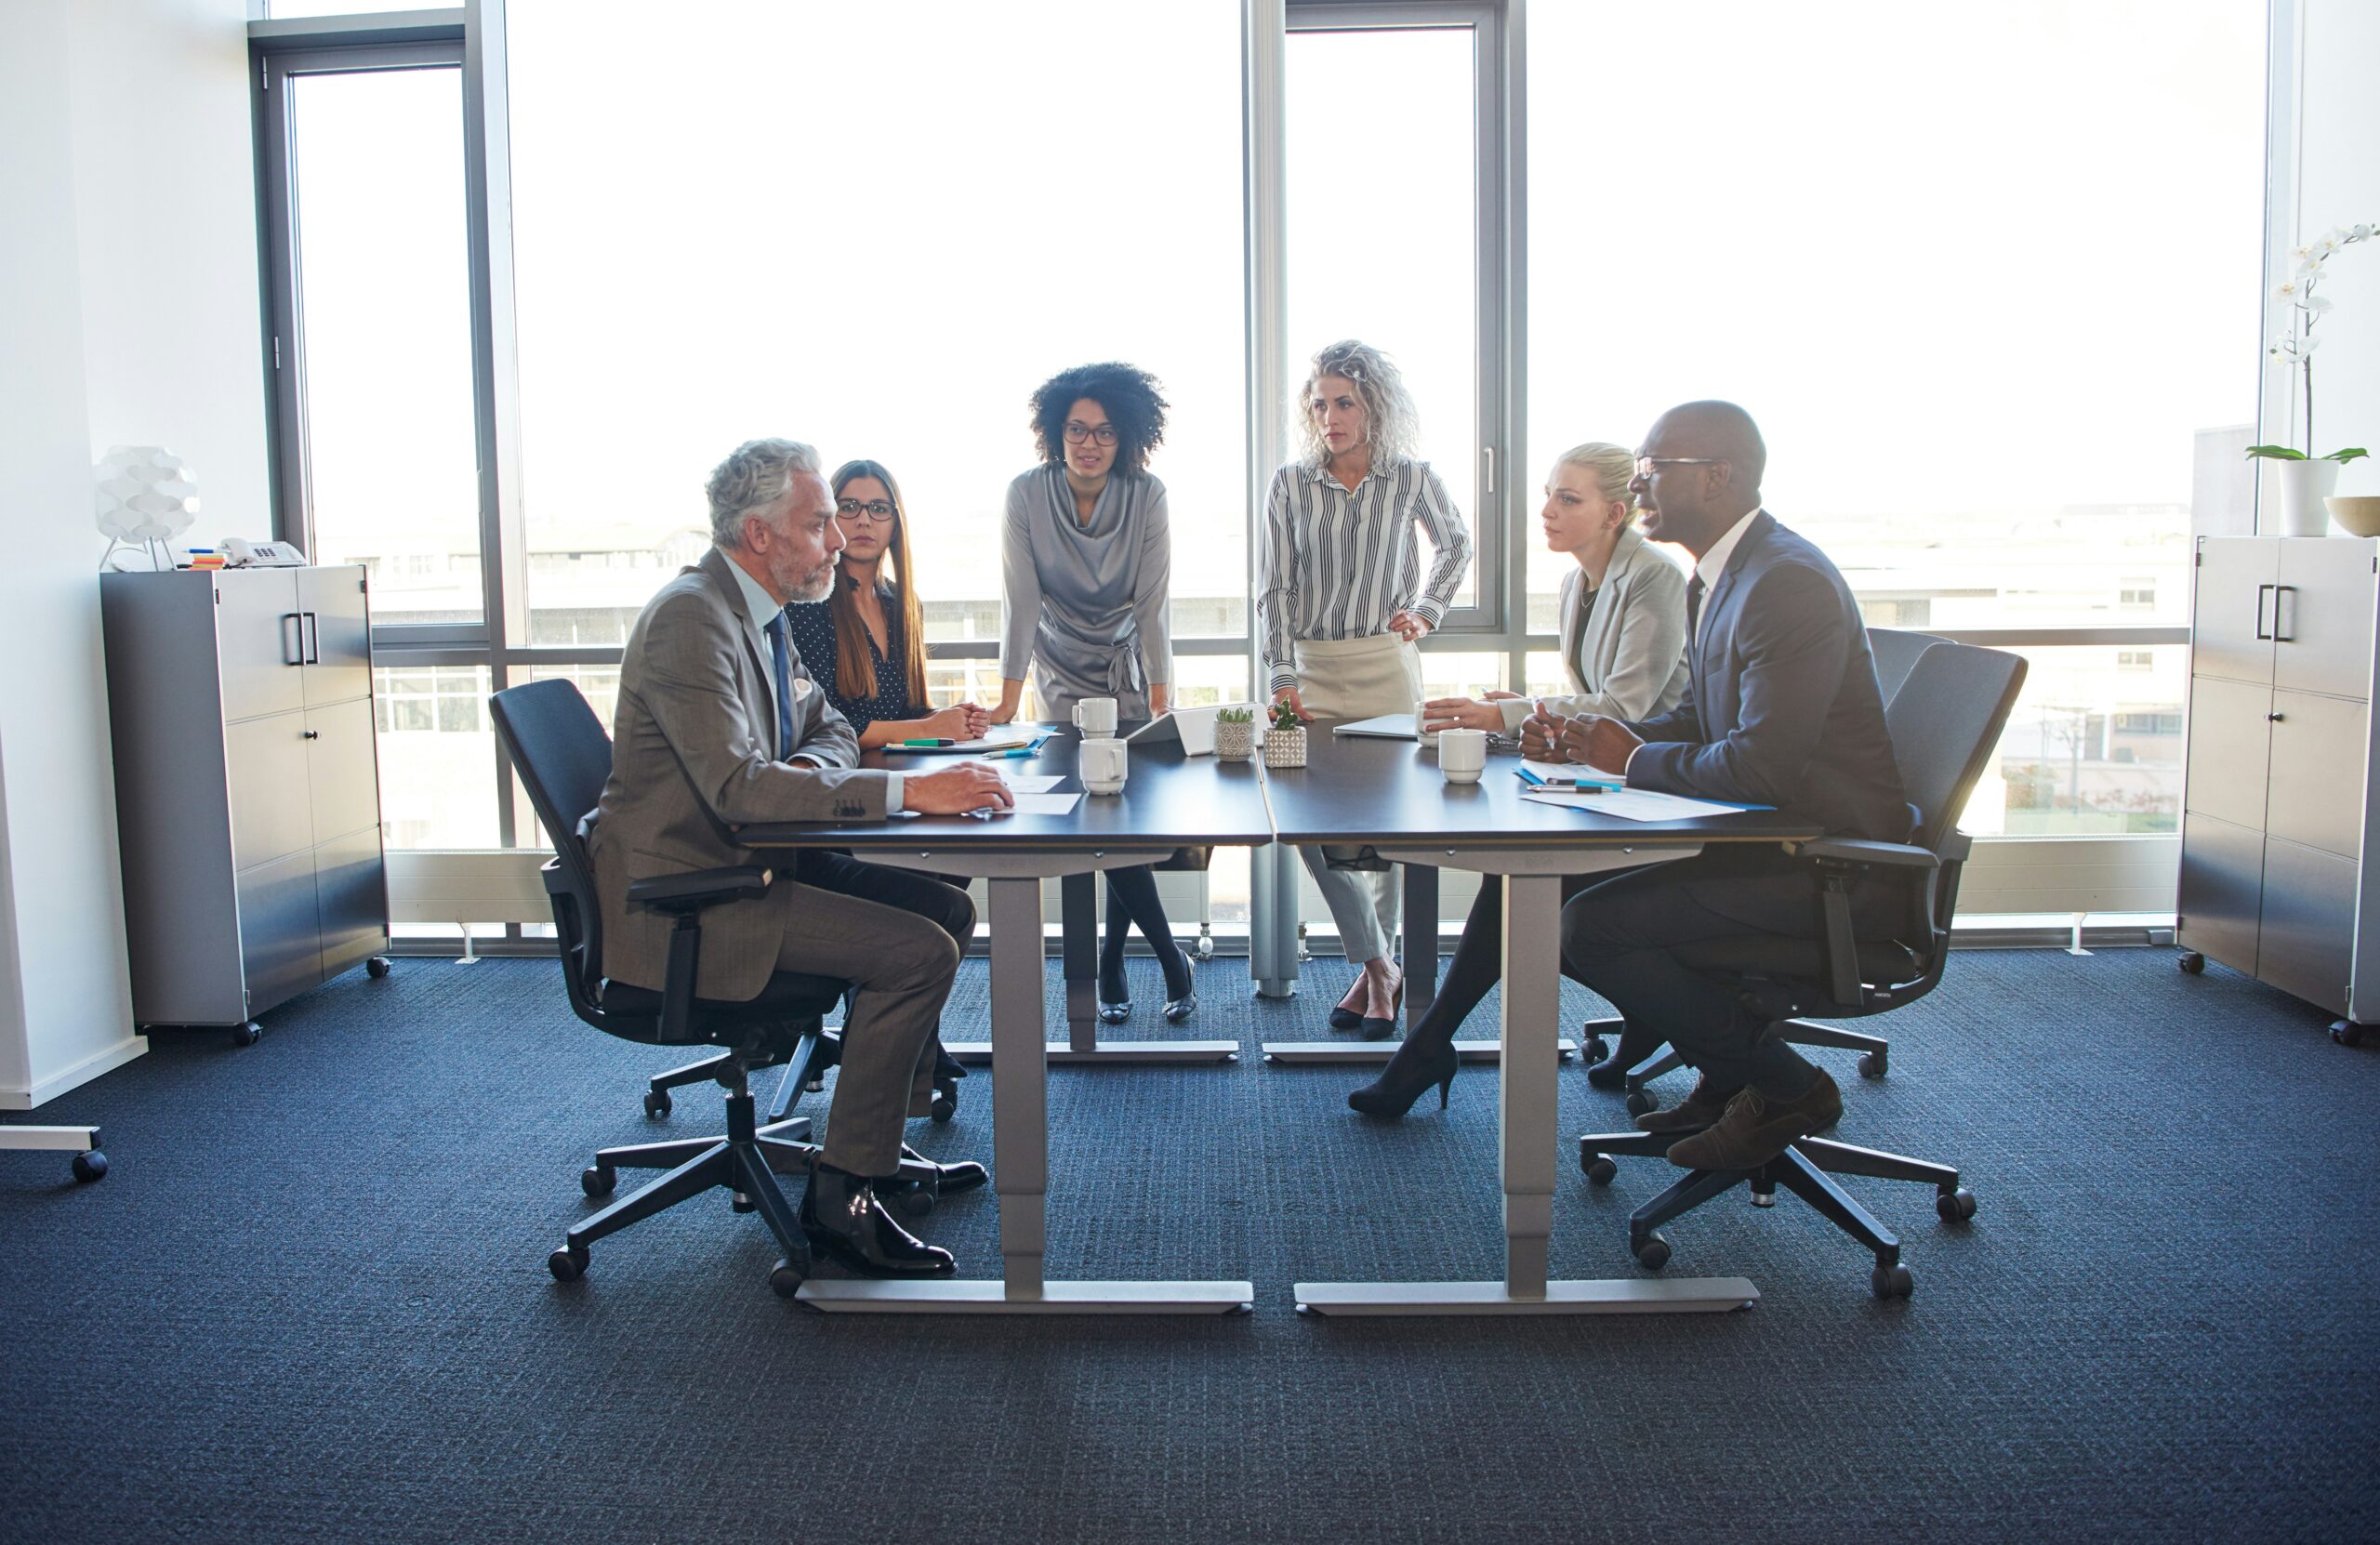 Diverse group of IT professionals engaged in a boardroom meeting at a large table with documents and laptops, in a bright office with large windows.